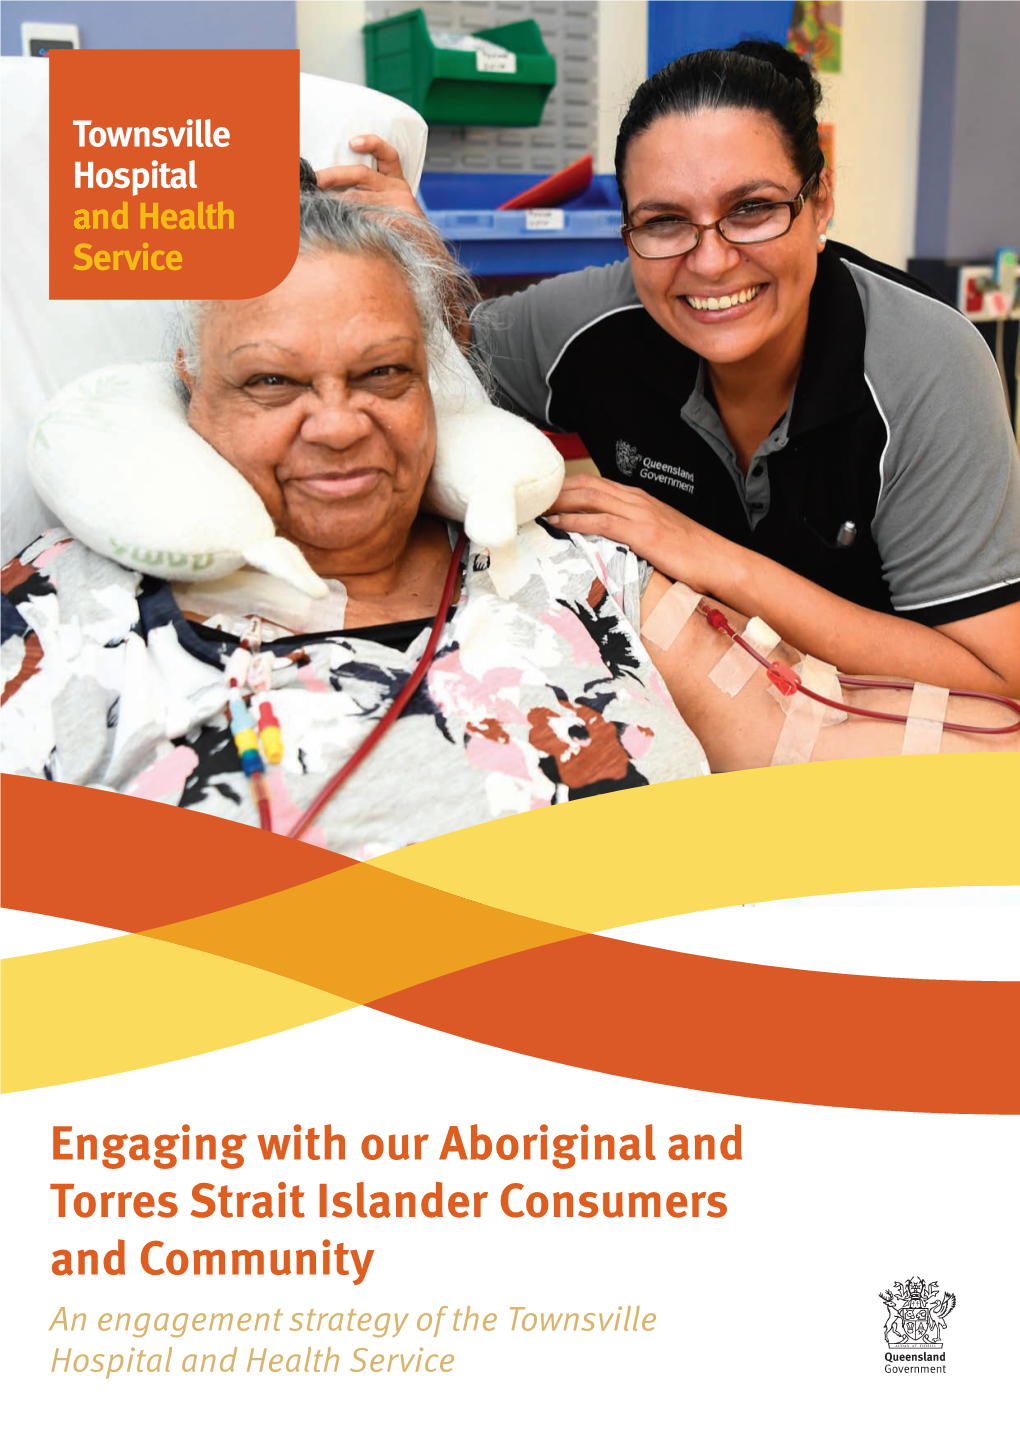 Engaging with Our Aboriginal and Torres Strait Islander